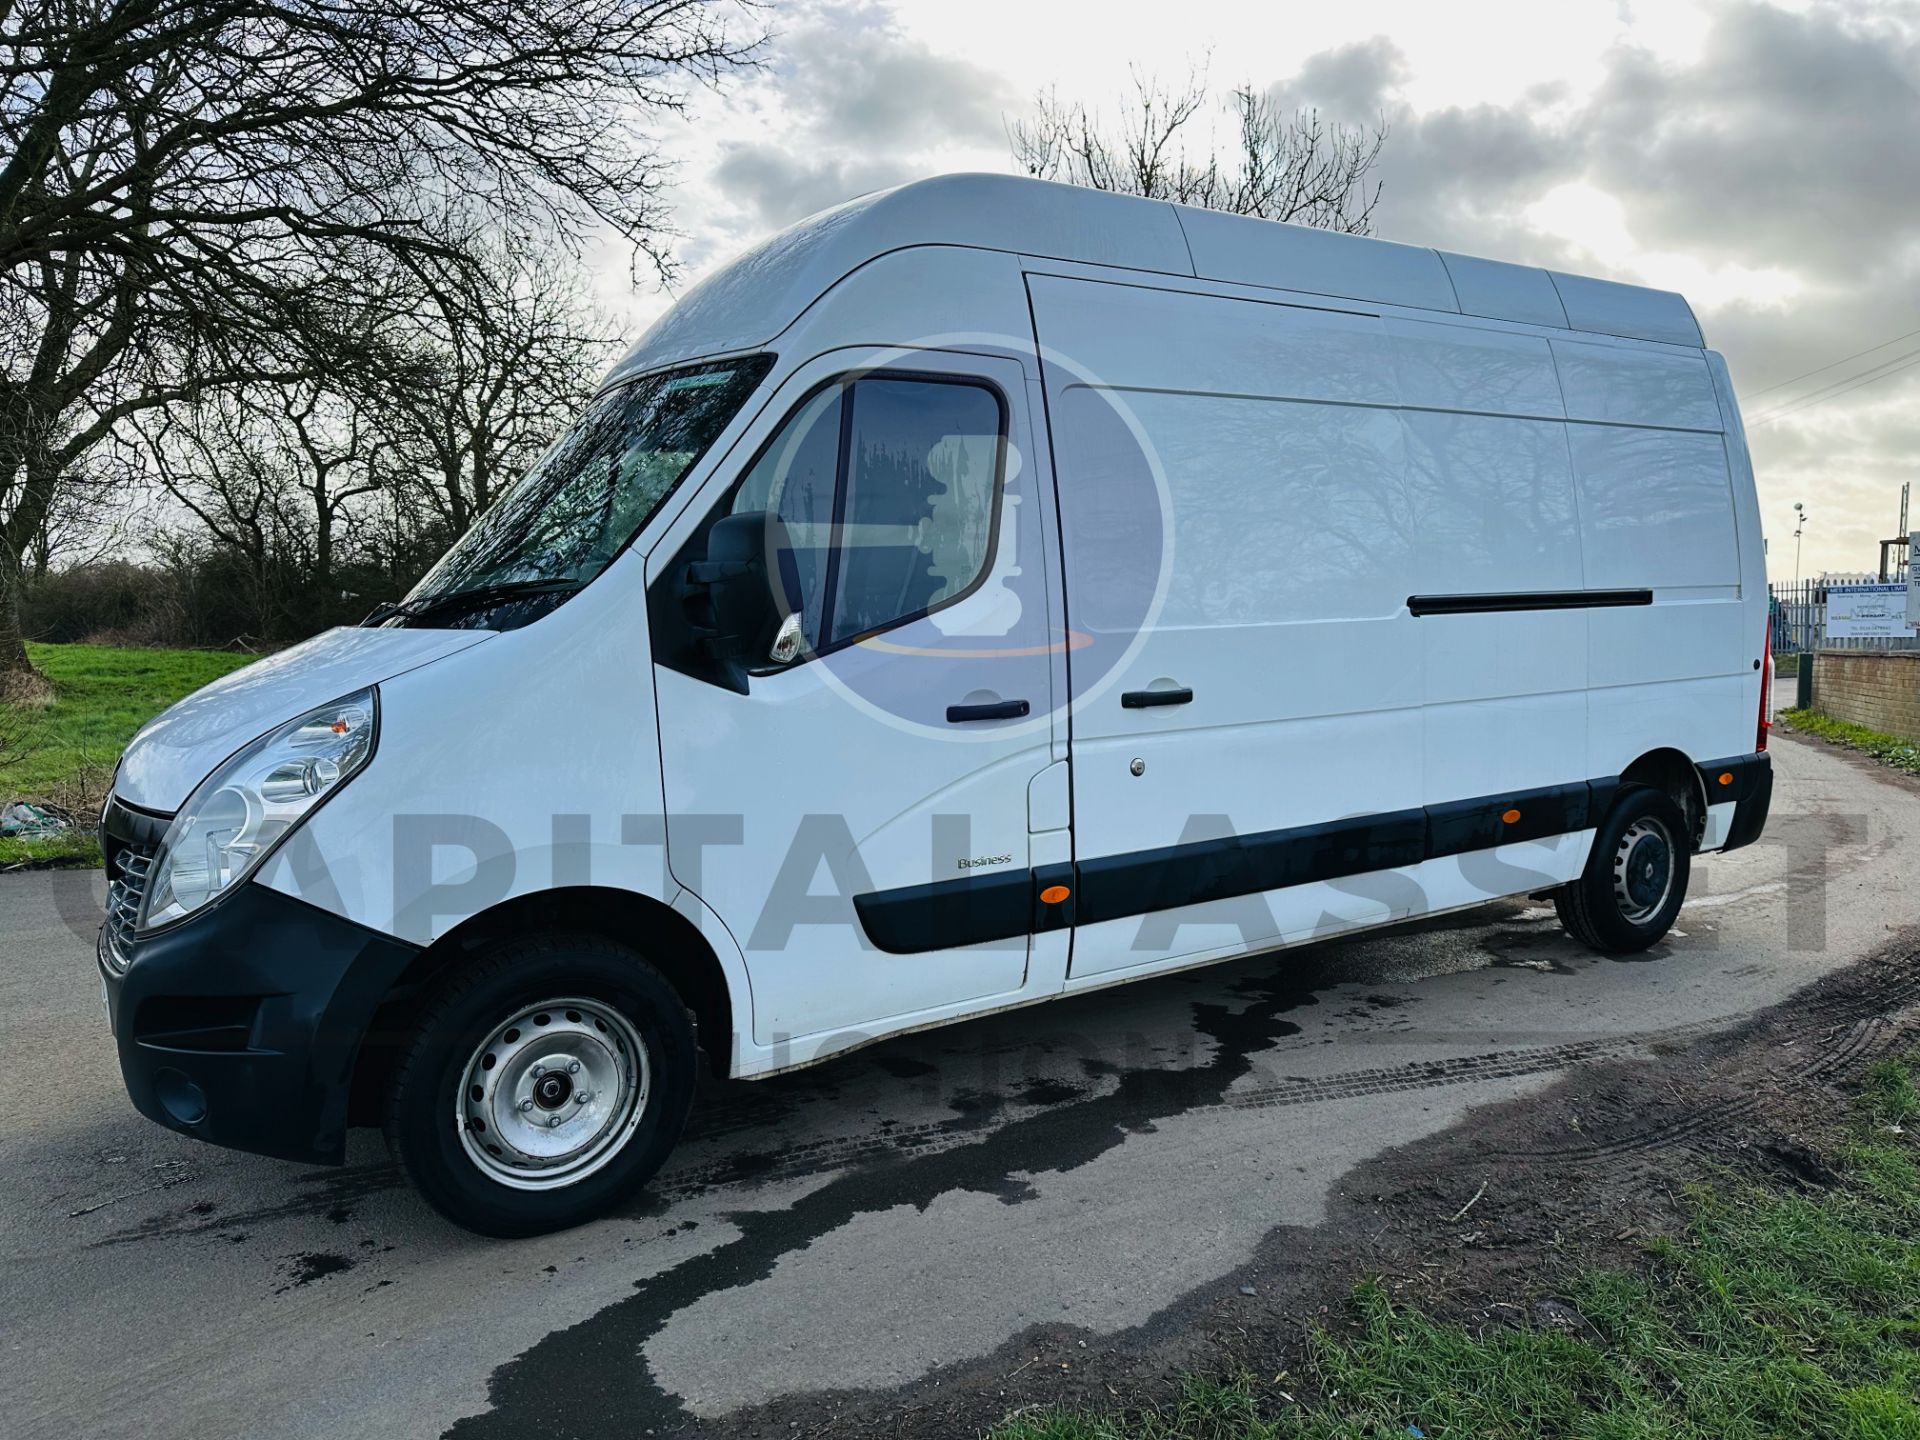 (On Sale) RENAULT MASTER *BUSINESS ENERGY* LWB EXTRA HI-ROOF (2019 - EURO 6) 2.3 DCI - 145 BHP - Image 4 of 25